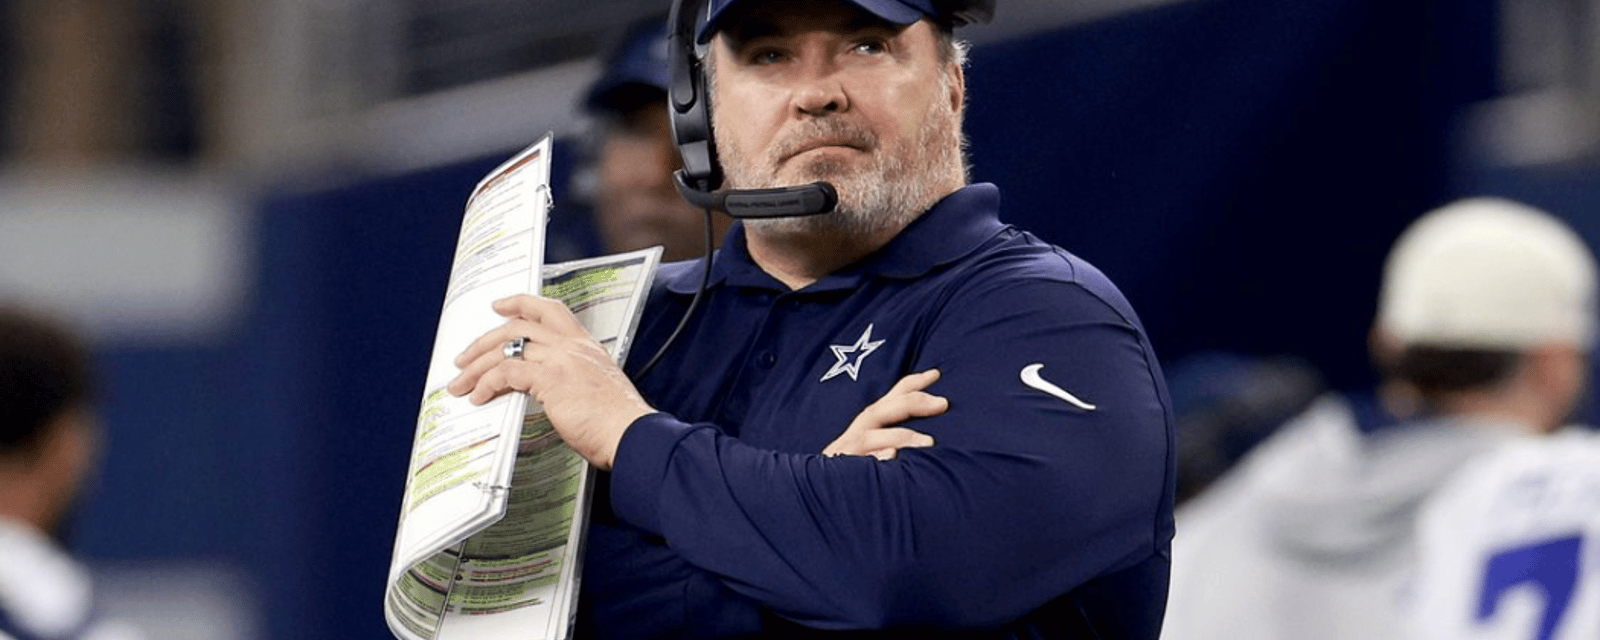 Cowboys coach Mike McCarthy's somber reaction to devastating injuries 